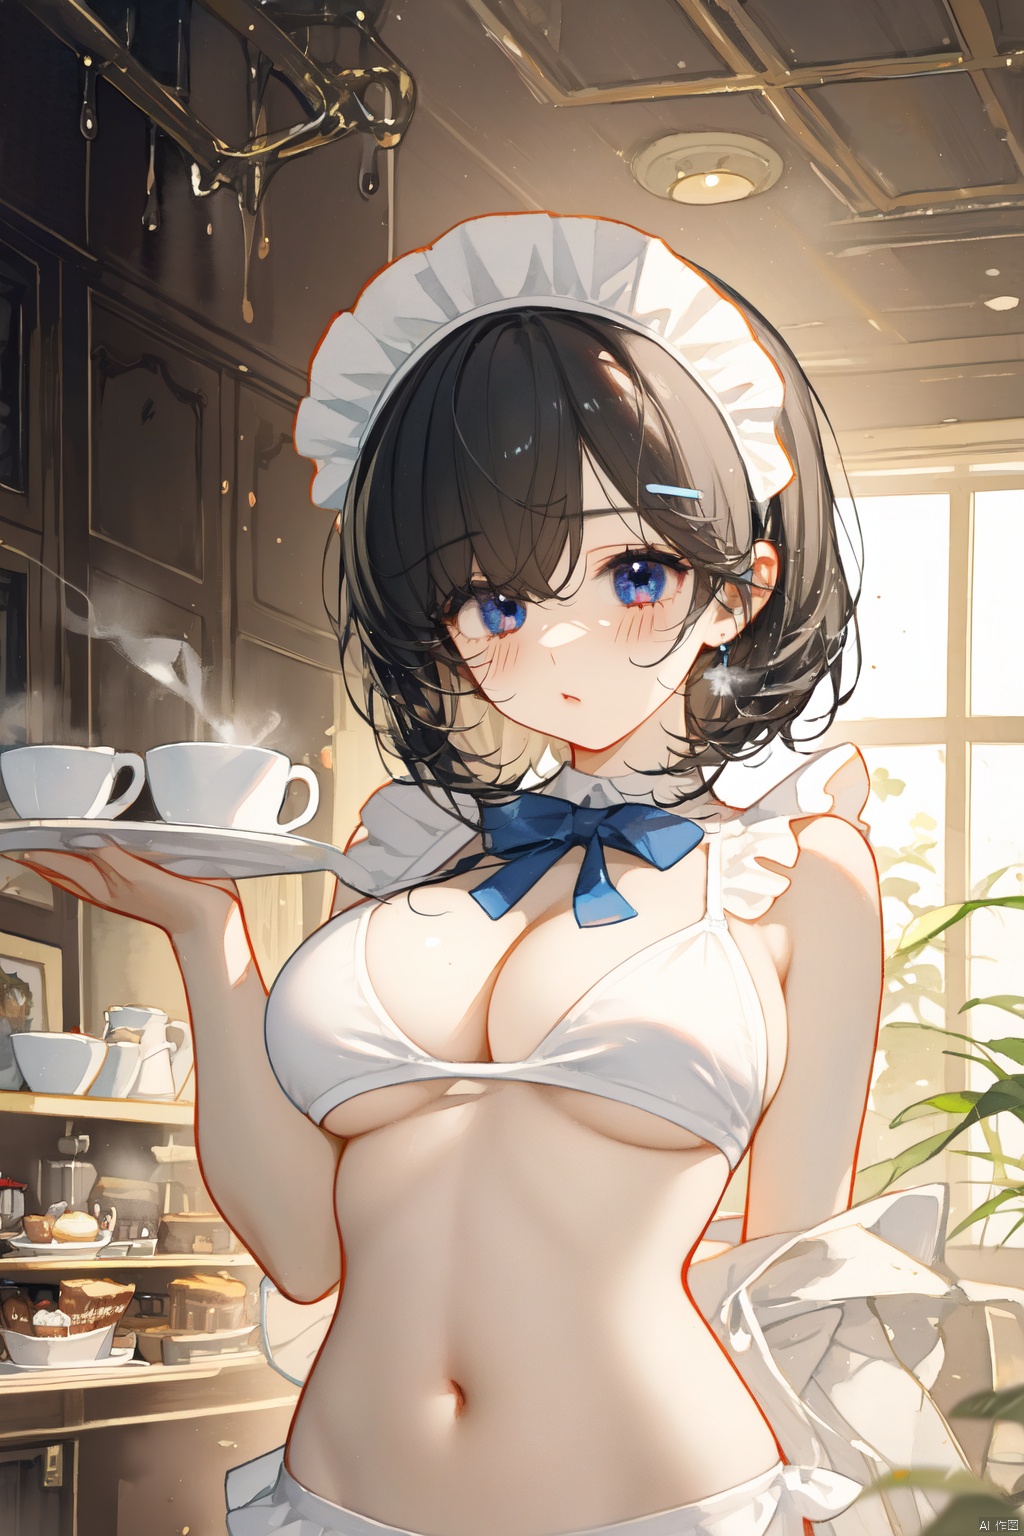 (((Maid Cafe Art))), ((Watercolor painting)), Maid cafe, ((Best quality)), Low angle view, ((Illustration)), (1 girl),blush, big breast, holding a coffee tray, beautiful detailed maid cafe interior, looking at viewer,bikini, swimsuit naked withand white apron, bare shoulders, lace headband, short bob hair, upper body, lens flare, light leaks, detailed beautiful coffee cups and desserts, maid cafe, black hair, ((Steam)), rising steam flow, navel, (Beautiful detailed eyes), backlight